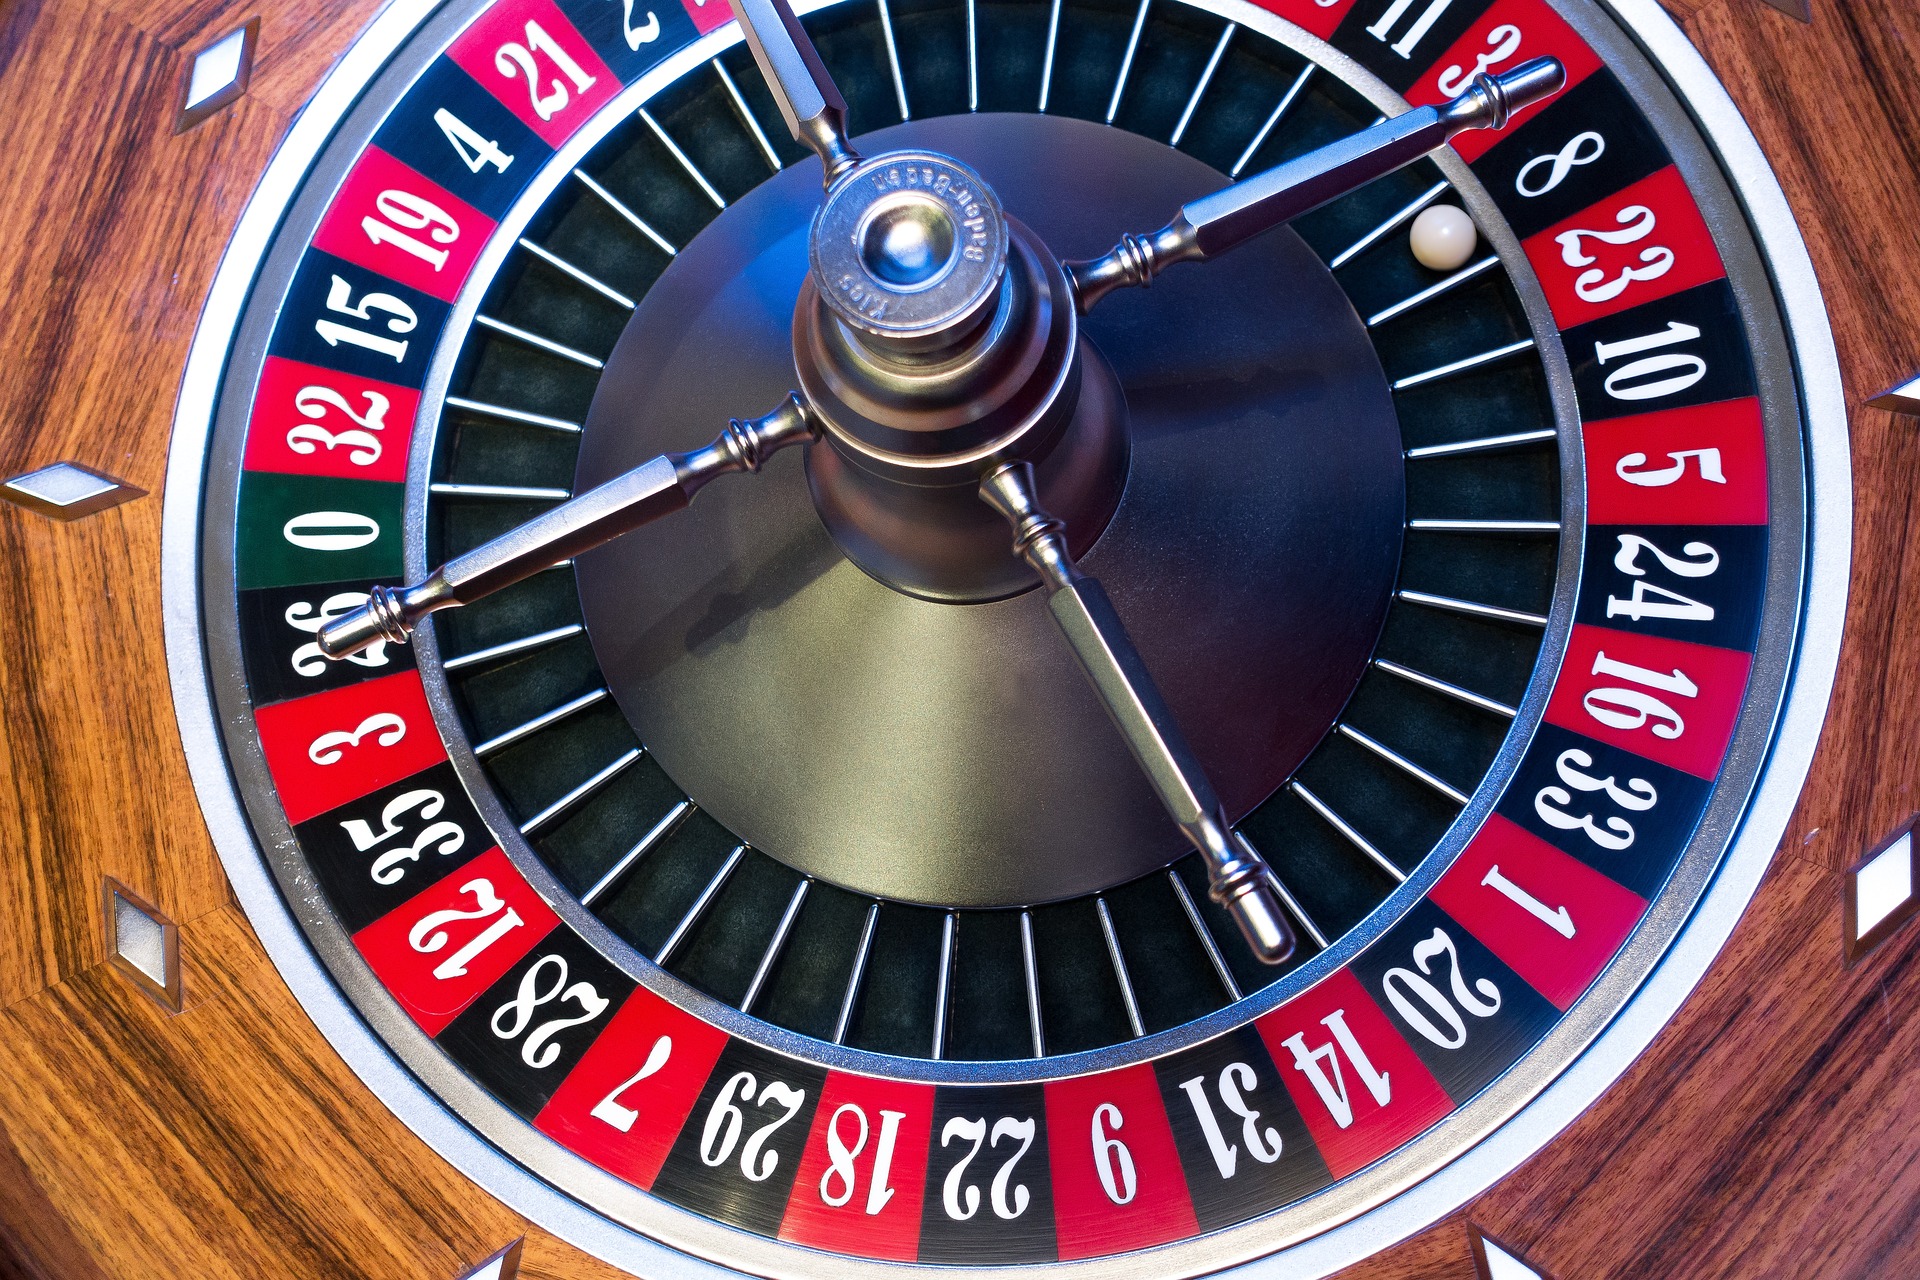 Roulette table with the ball landing on black 8